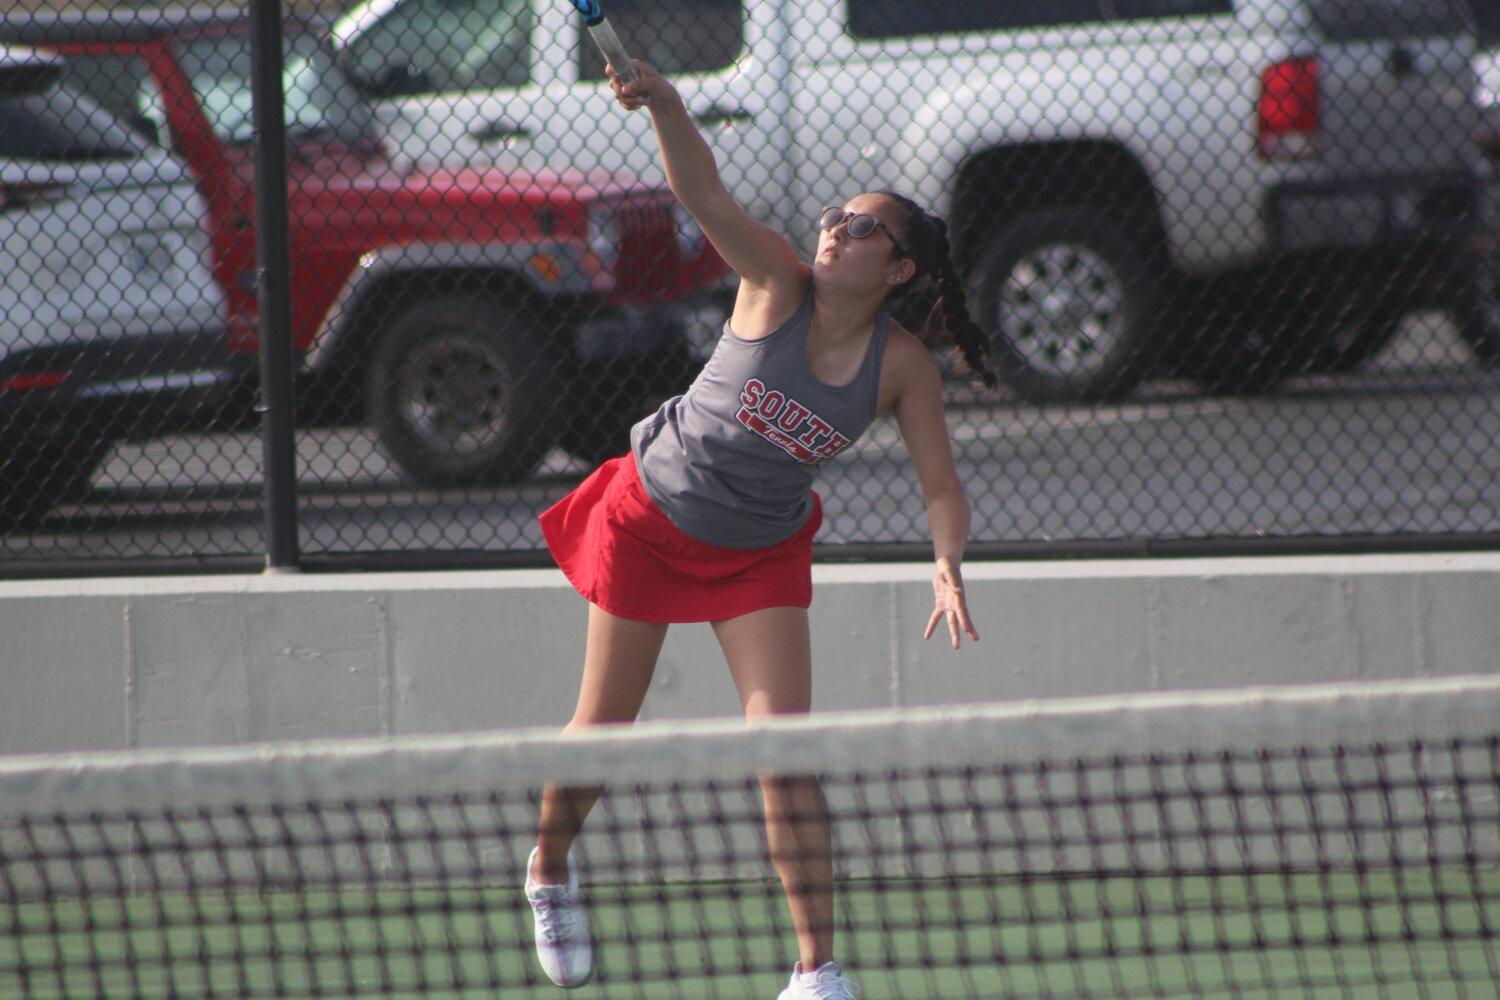 Fellow junior and 1 singles player Hanna Long won her match 6-0, 6-0 for Southmont.